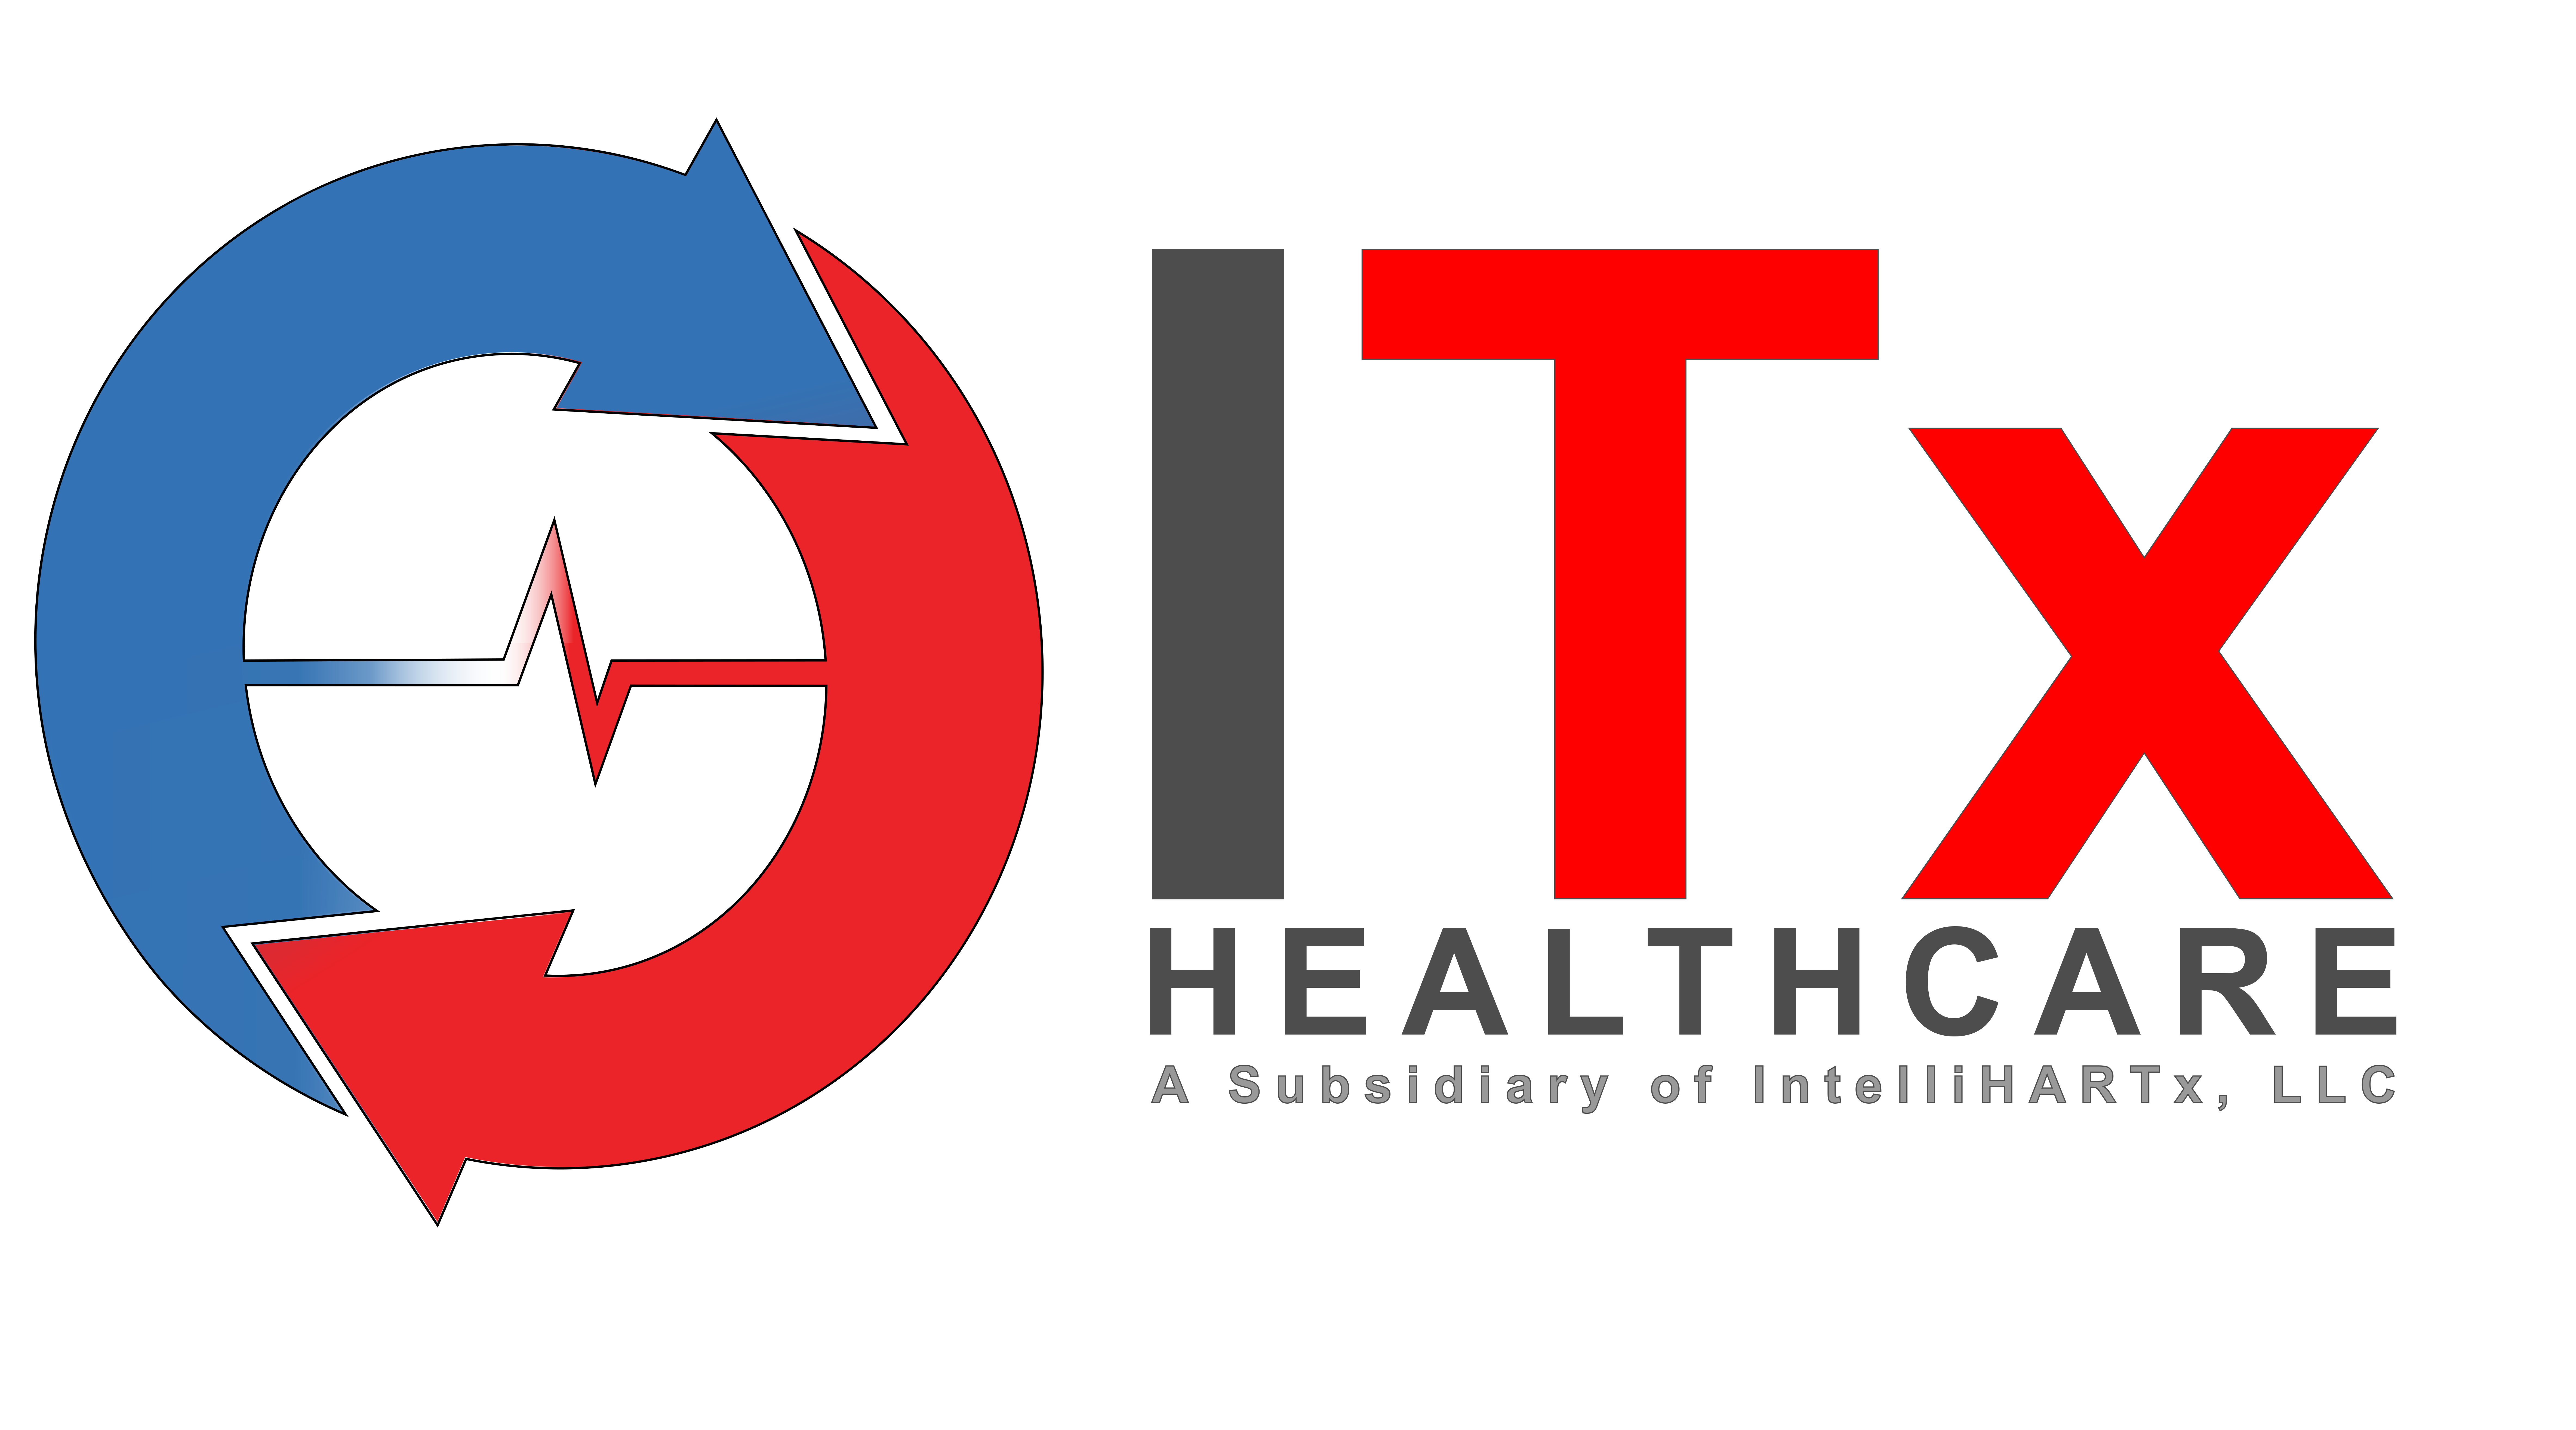 Welcome to the ITx Healthcare Payment Portal